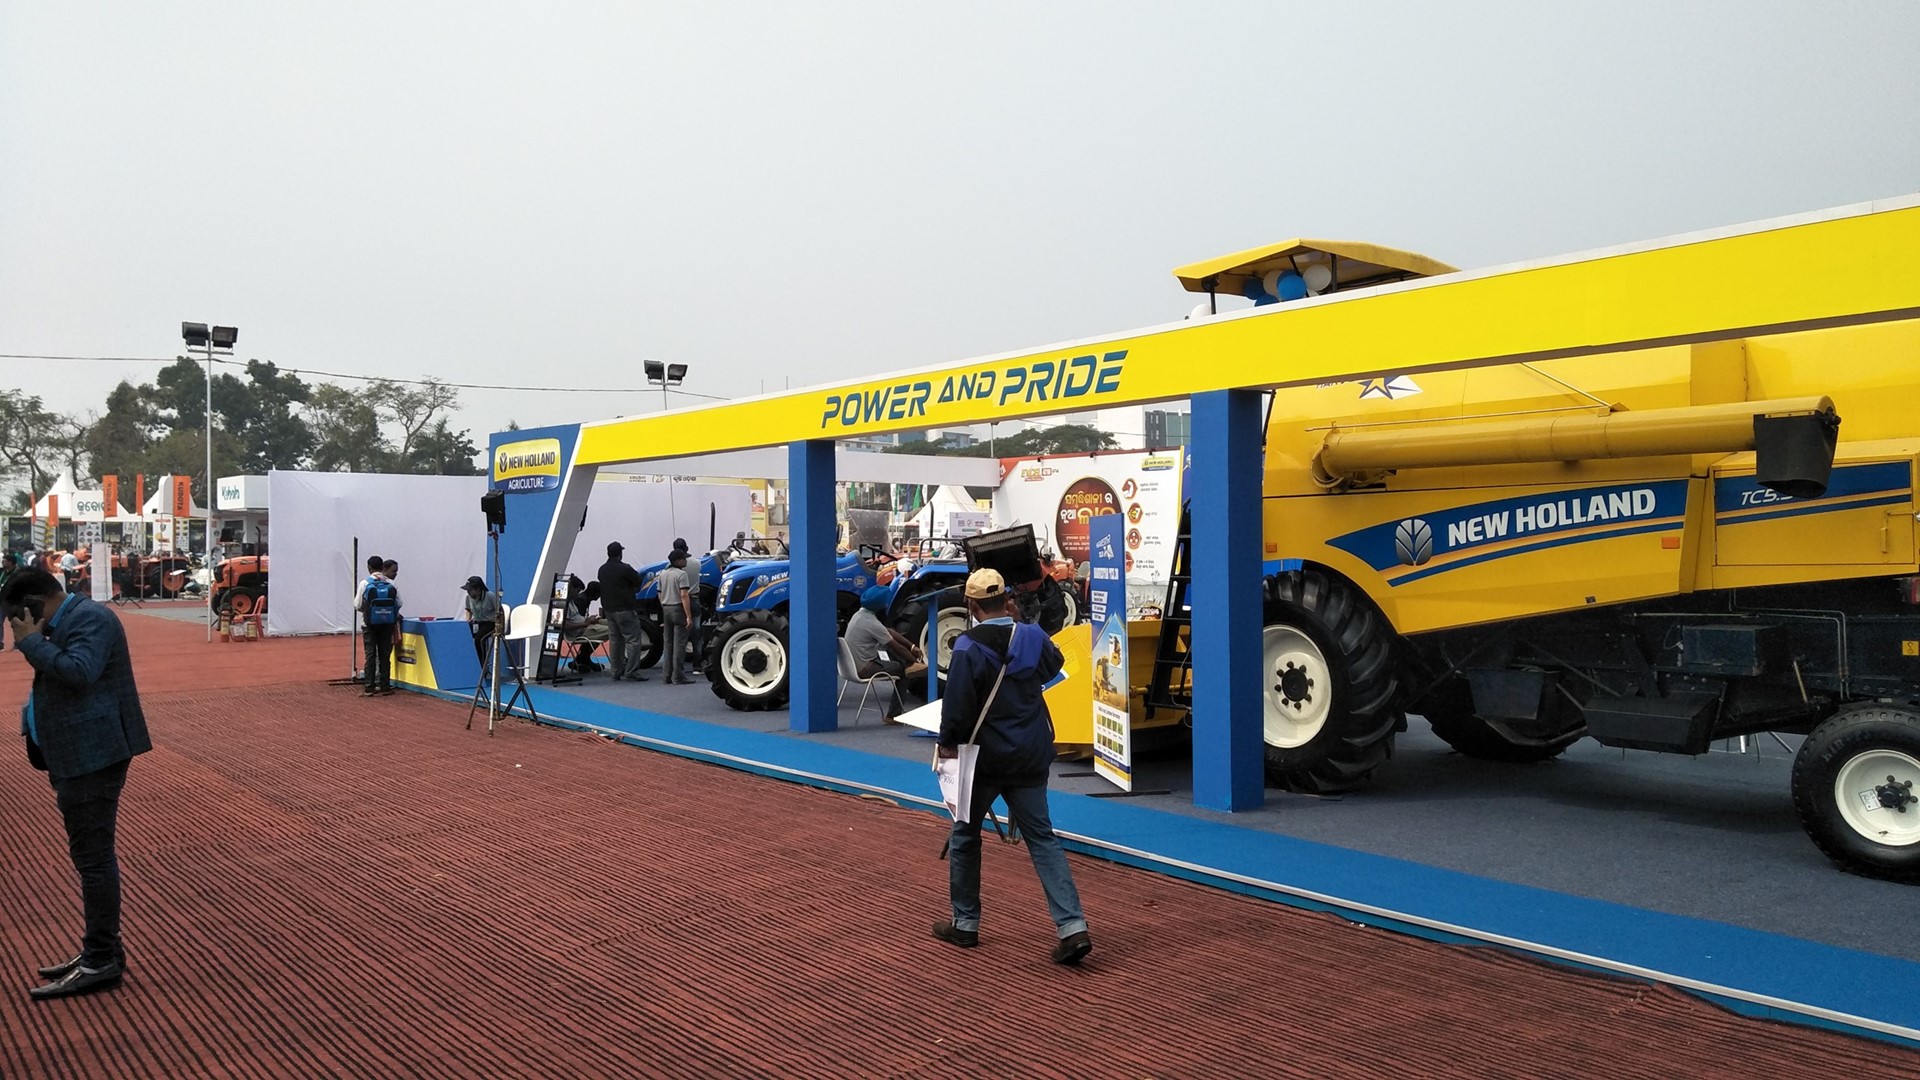 New Holland Agriculture products reign supreme at Krushi Odisha 2020